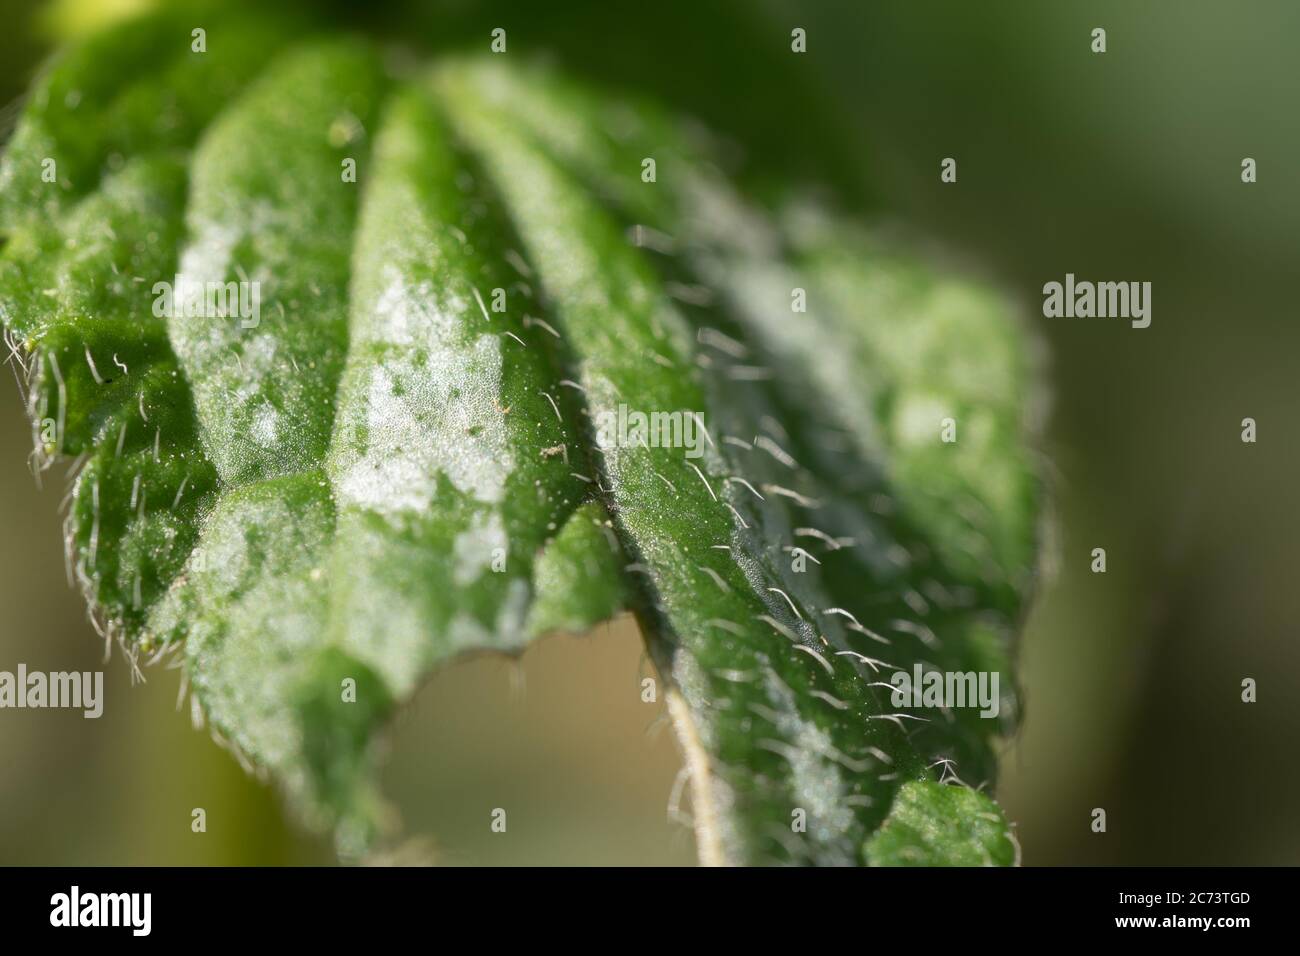 Close up of a leaf of the Yellow Lamium or dead-nettles in a garden. The fine outgrowths or hairs, fine outgrowths on the leaf is clearly visible Stock Photo